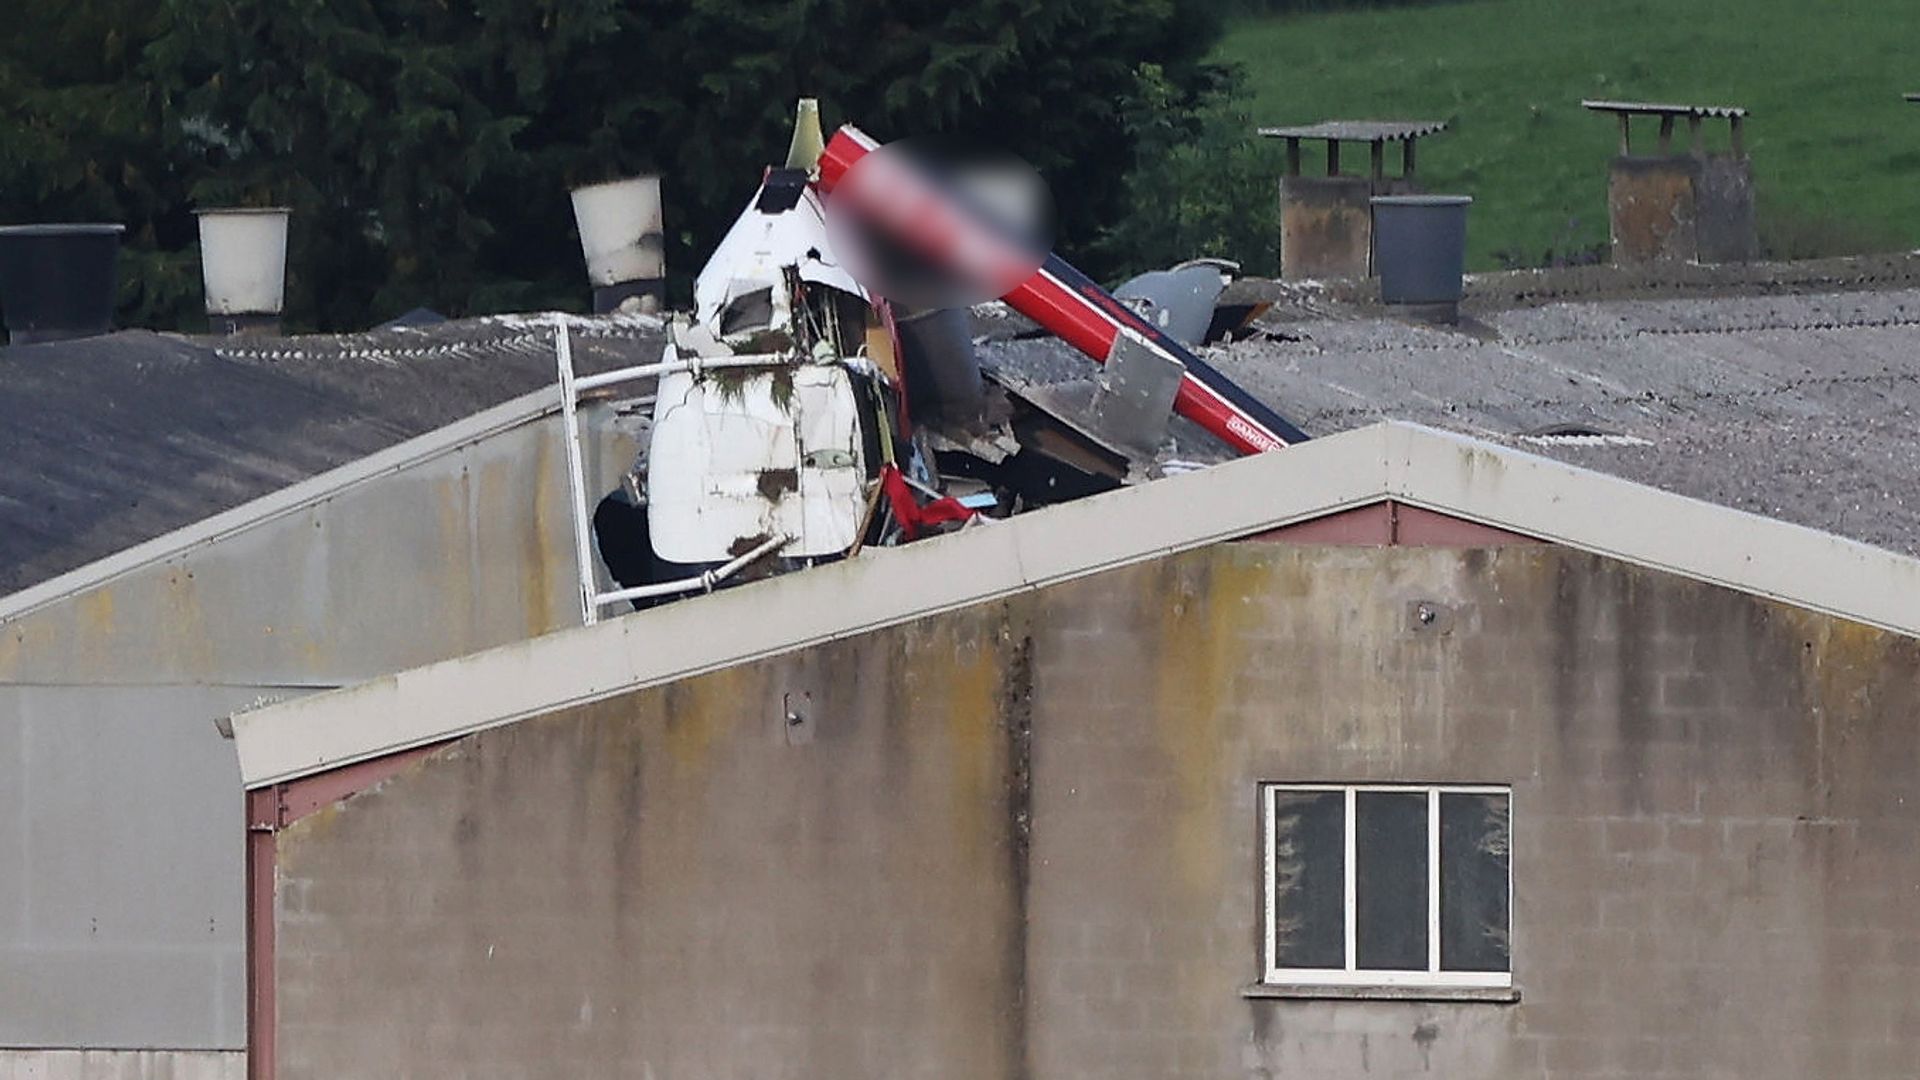 Two people killed after helicopter crashes into building in Ireland